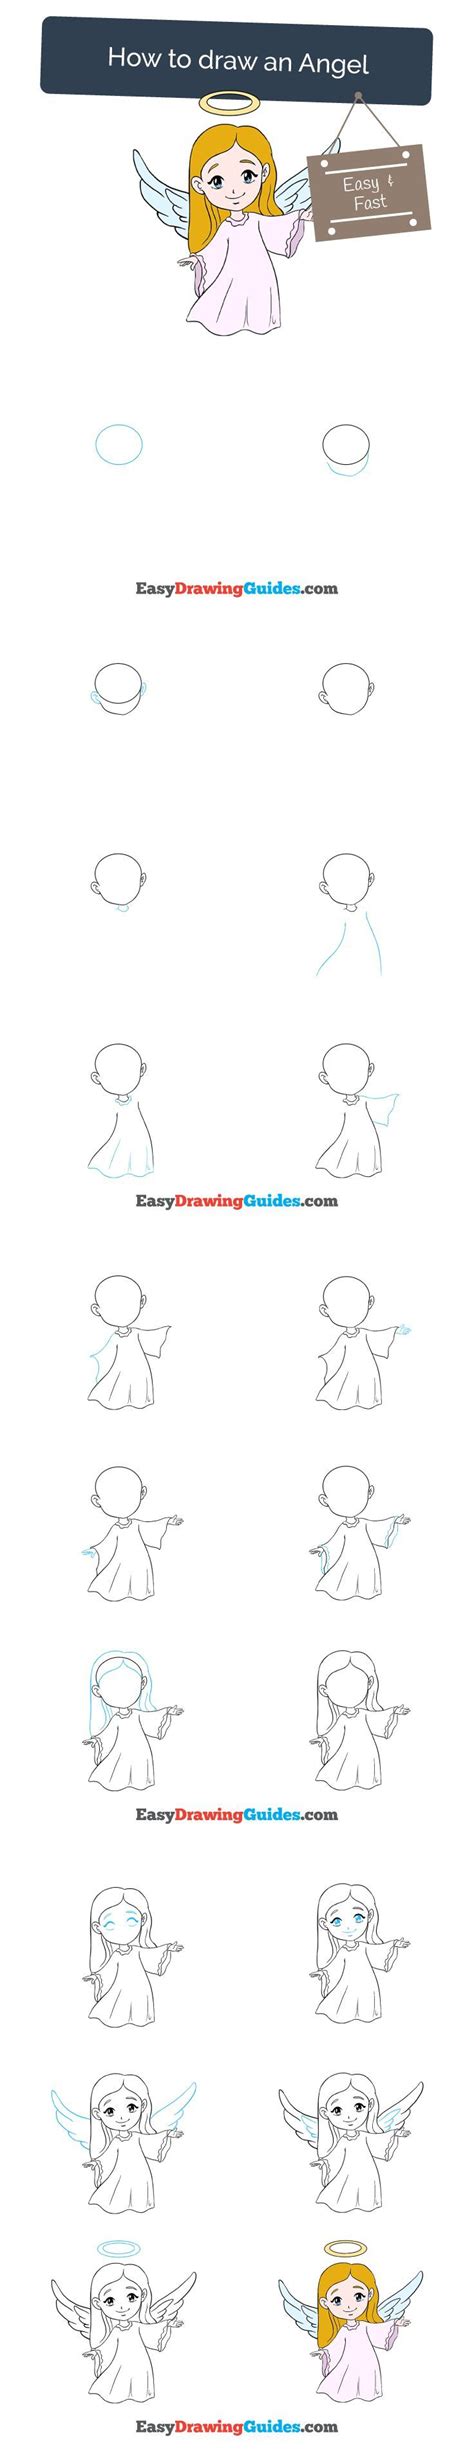 How To Draw An Angel Drawing Tutorials For Kids Easy